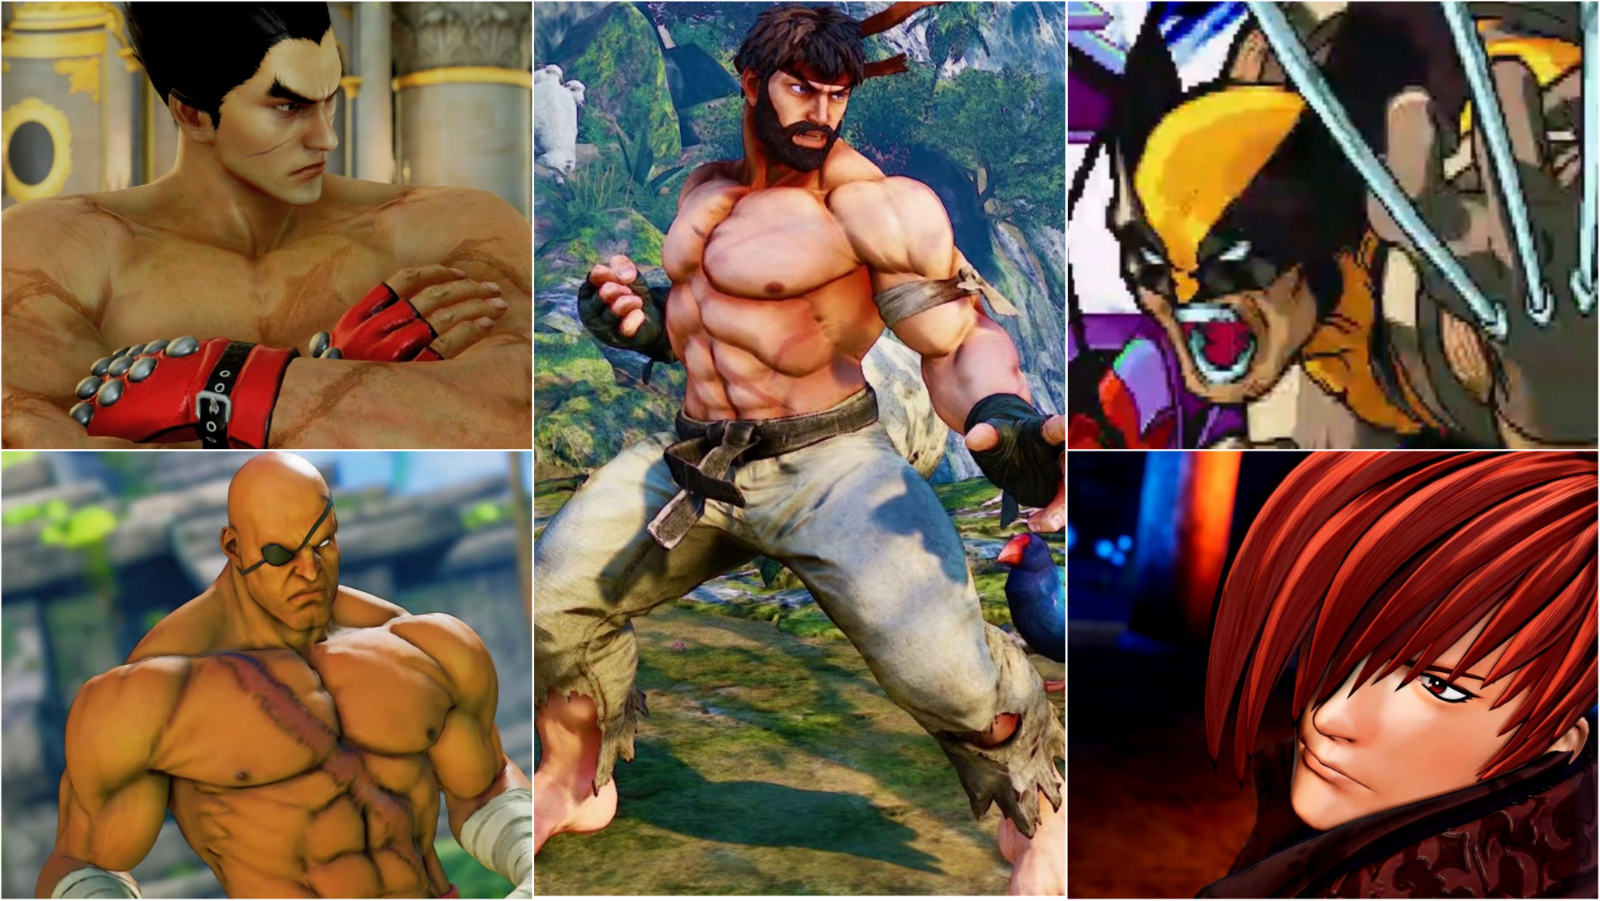 The 3 best ways to counter Akuma in Street Fighter V